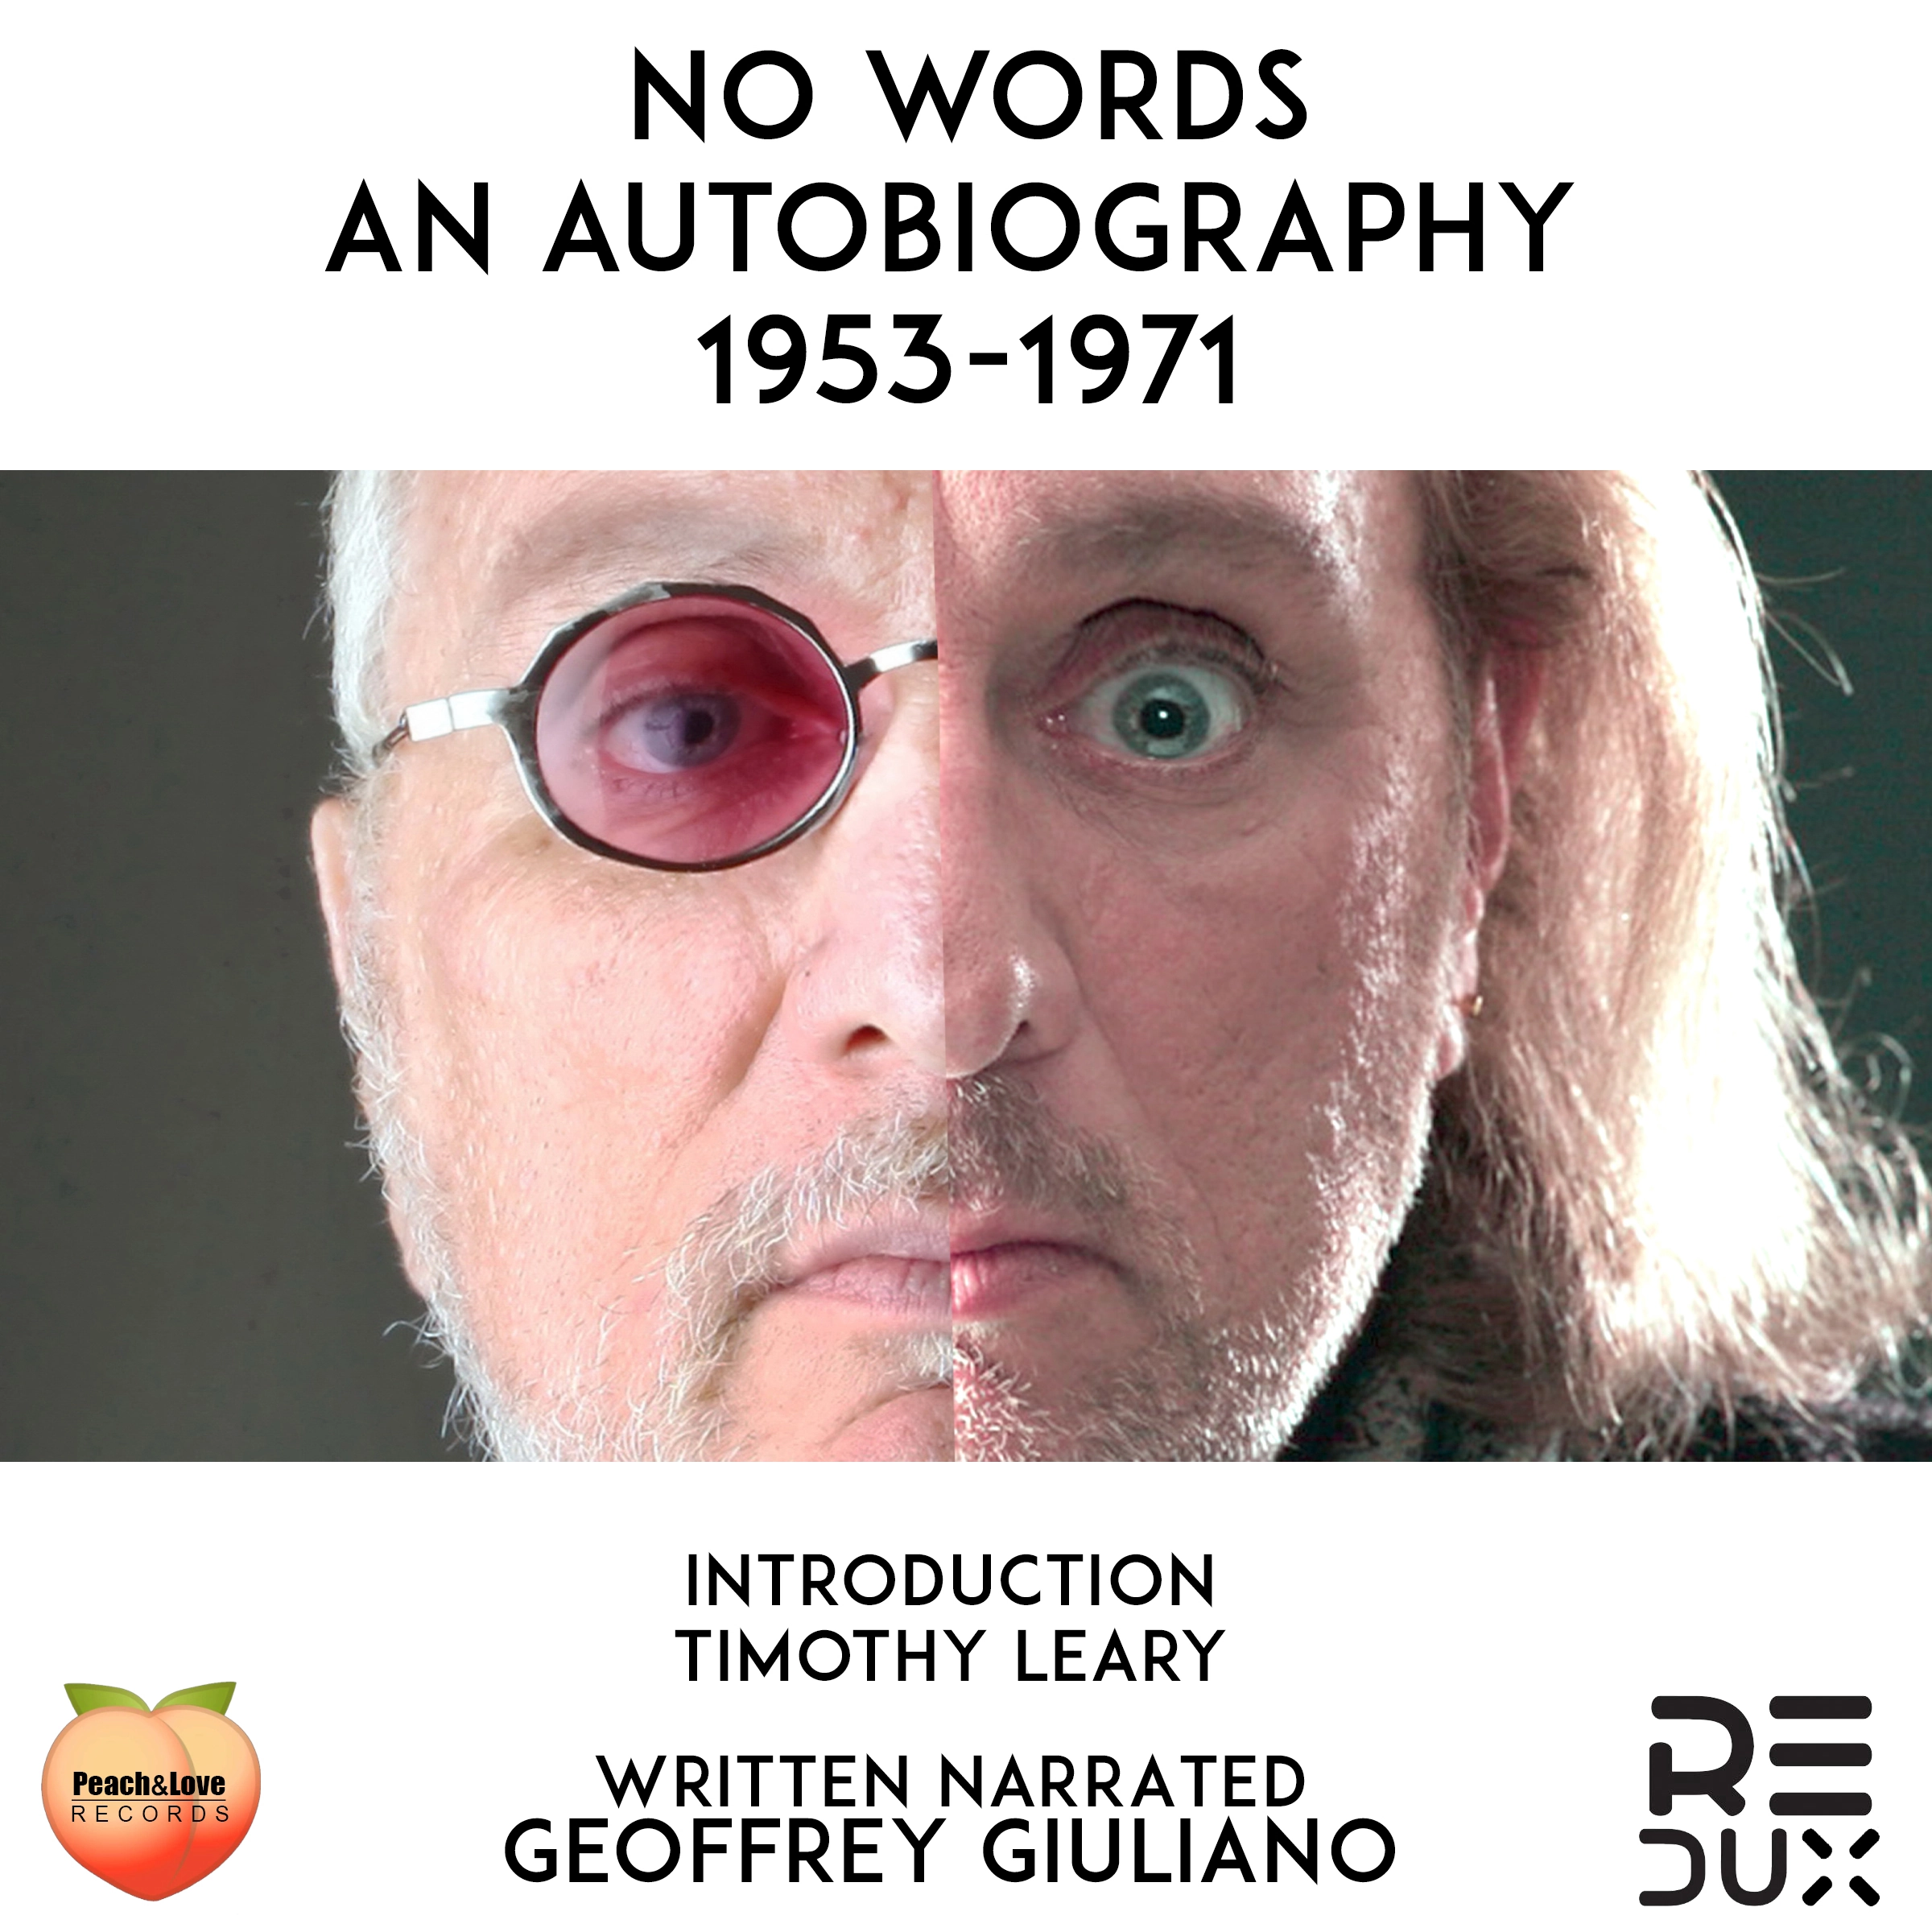 No Words An Autobiography 1953-1971 by Geoffrey Giuliano Audiobook